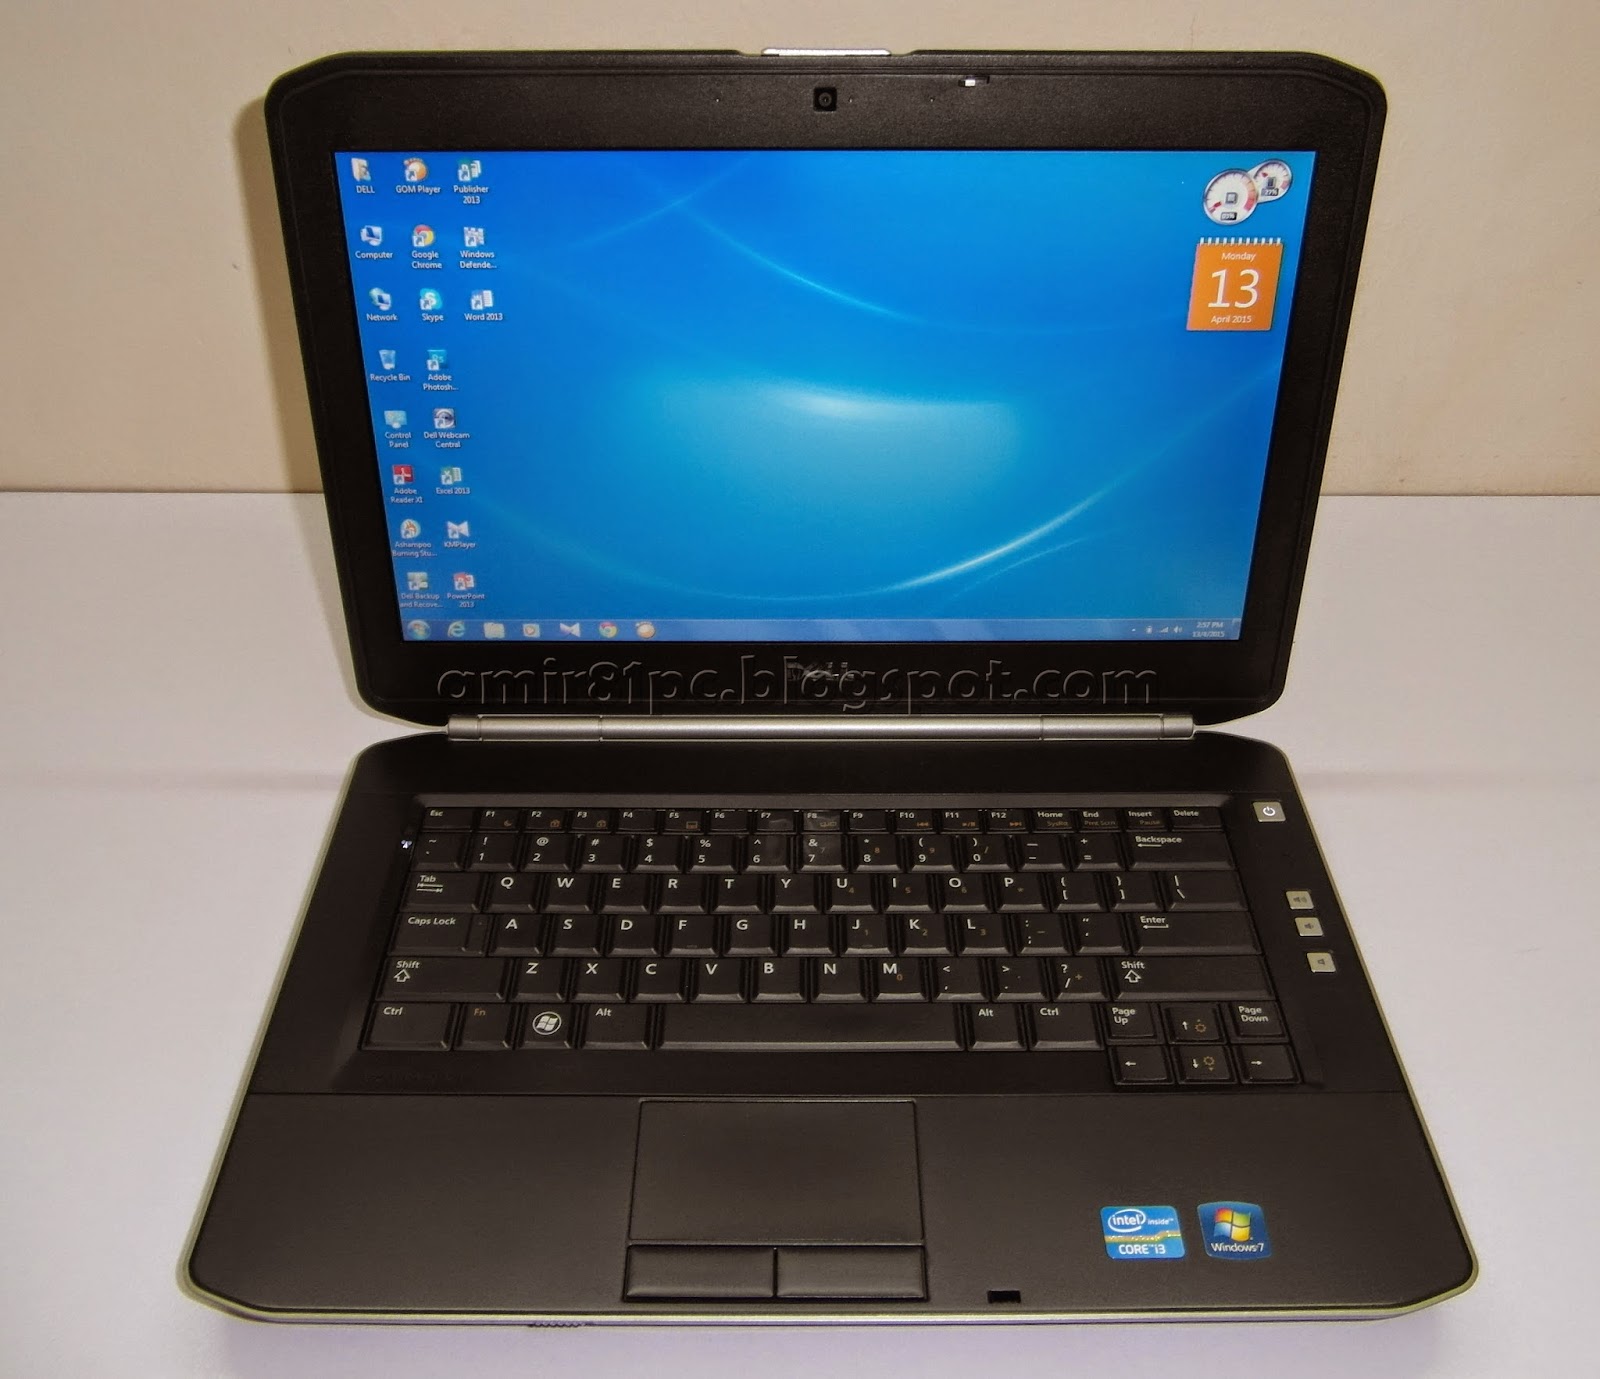 Three A Tech Computer Sales and Services: Used Laptop Dell Latitude